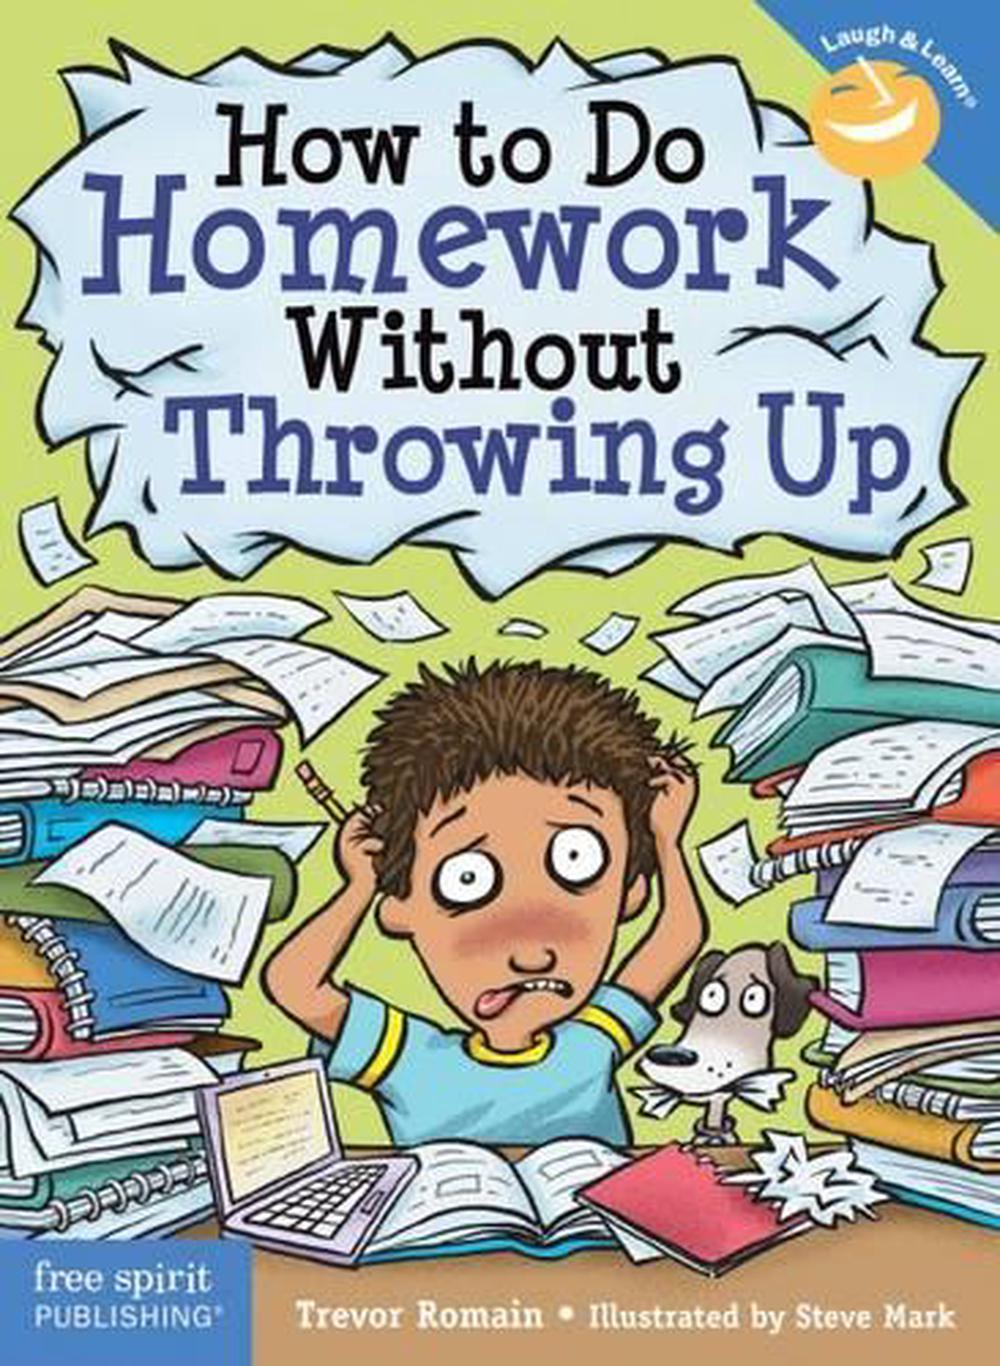 How to Do Homework Without Throwing Up by Trevor Romain